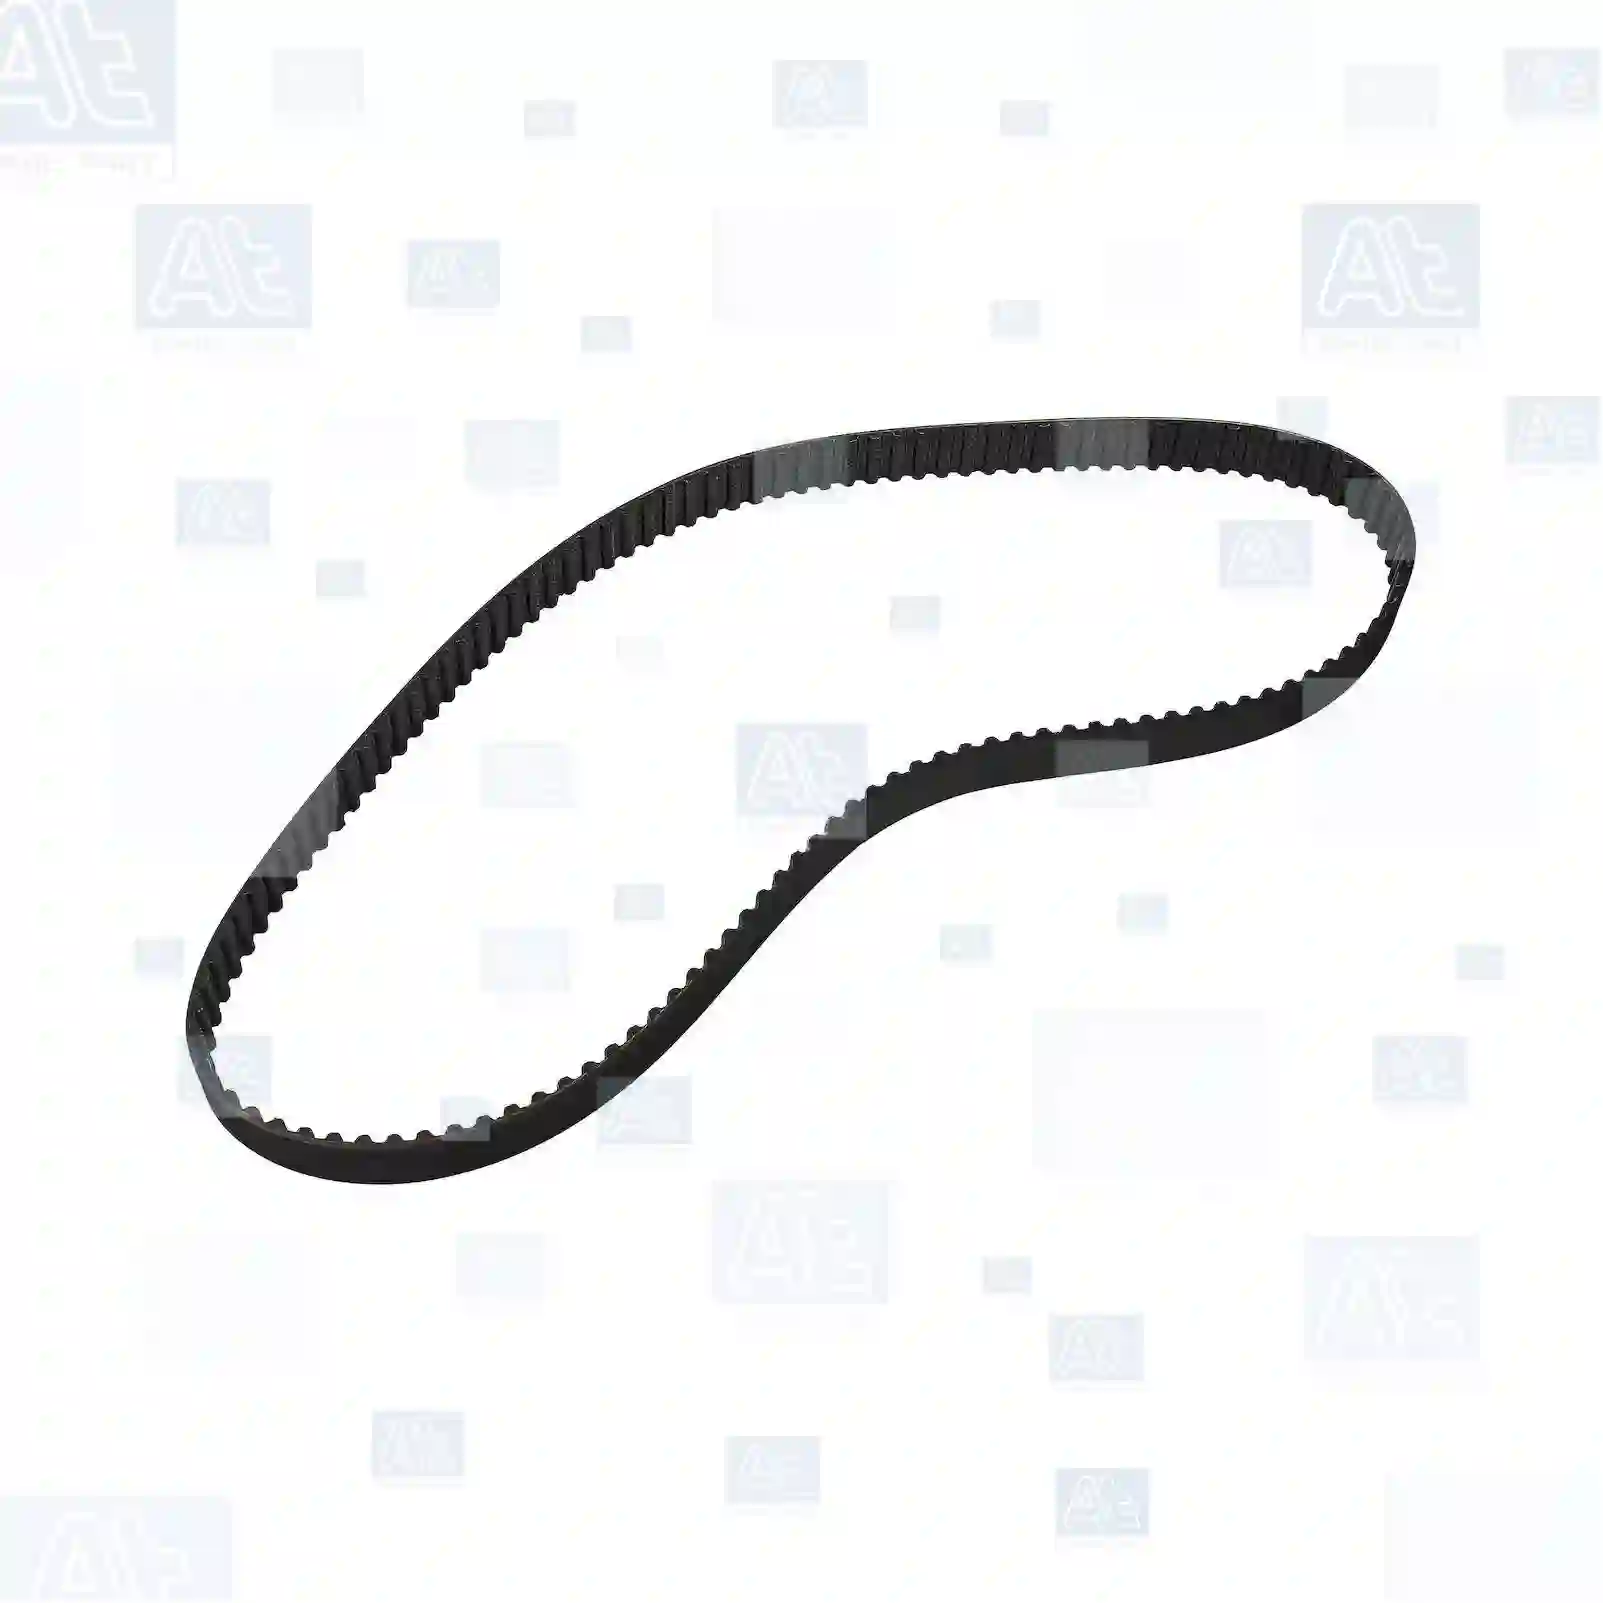 Timing belt, 77707307, 9620409980, GTB1049, GTB2006, LHN10013, LHN10015, LHN100310B, 0000081658, 034016, 081622, 081646, 081658, 081659, 081672, 081673, 081698, 340153, 340319, 340326, 340403, 9301036280, 9301036480, 9351009180, 9400816589, 9614252580, 9620409980, 07596722, 71719006, 71739919, 940081165, 9400816589, 94008165, 9614252580, 9614259780, 9620409980, 93010362, 24341-29000, 081658, 212151006040, 96142597, 9400816589, 9620409980, LBU5825, GTB2006, LHN10013, LHN10015, LHN100310B, GTB2006, LHN10013, LHN10015, LHN100310B, 13028-6F900, 0000081658, 034016, 081622, 081646, 081658, 081659, 081672, 081673, 081698, 340153, 340319, 340326, 340403, 9301036280, 9301036480, 9351009180, 9400816589, 9614252580, 9620409980, GTB1049, GTB2006, LHN10013, LHN10015, LHN1003010B, LHN100310B, LHN100460EVA, 12761-66G00, 12761-66G00-000, 12761-86CA0, 12761-86CT0, 24341-29000, 081622, 081623, 081658, 93010362, 9301036280, 254705116301, 254705116312, GTB2006, LHN10013, LHN10015, LHN100310B ||  77707307 At Spare Part | Engine, Accelerator Pedal, Camshaft, Connecting Rod, Crankcase, Crankshaft, Cylinder Head, Engine Suspension Mountings, Exhaust Manifold, Exhaust Gas Recirculation, Filter Kits, Flywheel Housing, General Overhaul Kits, Engine, Intake Manifold, Oil Cleaner, Oil Cooler, Oil Filter, Oil Pump, Oil Sump, Piston & Liner, Sensor & Switch, Timing Case, Turbocharger, Cooling System, Belt Tensioner, Coolant Filter, Coolant Pipe, Corrosion Prevention Agent, Drive, Expansion Tank, Fan, Intercooler, Monitors & Gauges, Radiator, Thermostat, V-Belt / Timing belt, Water Pump, Fuel System, Electronical Injector Unit, Feed Pump, Fuel Filter, cpl., Fuel Gauge Sender,  Fuel Line, Fuel Pump, Fuel Tank, Injection Line Kit, Injection Pump, Exhaust System, Clutch & Pedal, Gearbox, Propeller Shaft, Axles, Brake System, Hubs & Wheels, Suspension, Leaf Spring, Universal Parts / Accessories, Steering, Electrical System, Cabin Timing belt, 77707307, 9620409980, GTB1049, GTB2006, LHN10013, LHN10015, LHN100310B, 0000081658, 034016, 081622, 081646, 081658, 081659, 081672, 081673, 081698, 340153, 340319, 340326, 340403, 9301036280, 9301036480, 9351009180, 9400816589, 9614252580, 9620409980, 07596722, 71719006, 71739919, 940081165, 9400816589, 94008165, 9614252580, 9614259780, 9620409980, 93010362, 24341-29000, 081658, 212151006040, 96142597, 9400816589, 9620409980, LBU5825, GTB2006, LHN10013, LHN10015, LHN100310B, GTB2006, LHN10013, LHN10015, LHN100310B, 13028-6F900, 0000081658, 034016, 081622, 081646, 081658, 081659, 081672, 081673, 081698, 340153, 340319, 340326, 340403, 9301036280, 9301036480, 9351009180, 9400816589, 9614252580, 9620409980, GTB1049, GTB2006, LHN10013, LHN10015, LHN1003010B, LHN100310B, LHN100460EVA, 12761-66G00, 12761-66G00-000, 12761-86CA0, 12761-86CT0, 24341-29000, 081622, 081623, 081658, 93010362, 9301036280, 254705116301, 254705116312, GTB2006, LHN10013, LHN10015, LHN100310B ||  77707307 At Spare Part | Engine, Accelerator Pedal, Camshaft, Connecting Rod, Crankcase, Crankshaft, Cylinder Head, Engine Suspension Mountings, Exhaust Manifold, Exhaust Gas Recirculation, Filter Kits, Flywheel Housing, General Overhaul Kits, Engine, Intake Manifold, Oil Cleaner, Oil Cooler, Oil Filter, Oil Pump, Oil Sump, Piston & Liner, Sensor & Switch, Timing Case, Turbocharger, Cooling System, Belt Tensioner, Coolant Filter, Coolant Pipe, Corrosion Prevention Agent, Drive, Expansion Tank, Fan, Intercooler, Monitors & Gauges, Radiator, Thermostat, V-Belt / Timing belt, Water Pump, Fuel System, Electronical Injector Unit, Feed Pump, Fuel Filter, cpl., Fuel Gauge Sender,  Fuel Line, Fuel Pump, Fuel Tank, Injection Line Kit, Injection Pump, Exhaust System, Clutch & Pedal, Gearbox, Propeller Shaft, Axles, Brake System, Hubs & Wheels, Suspension, Leaf Spring, Universal Parts / Accessories, Steering, Electrical System, Cabin